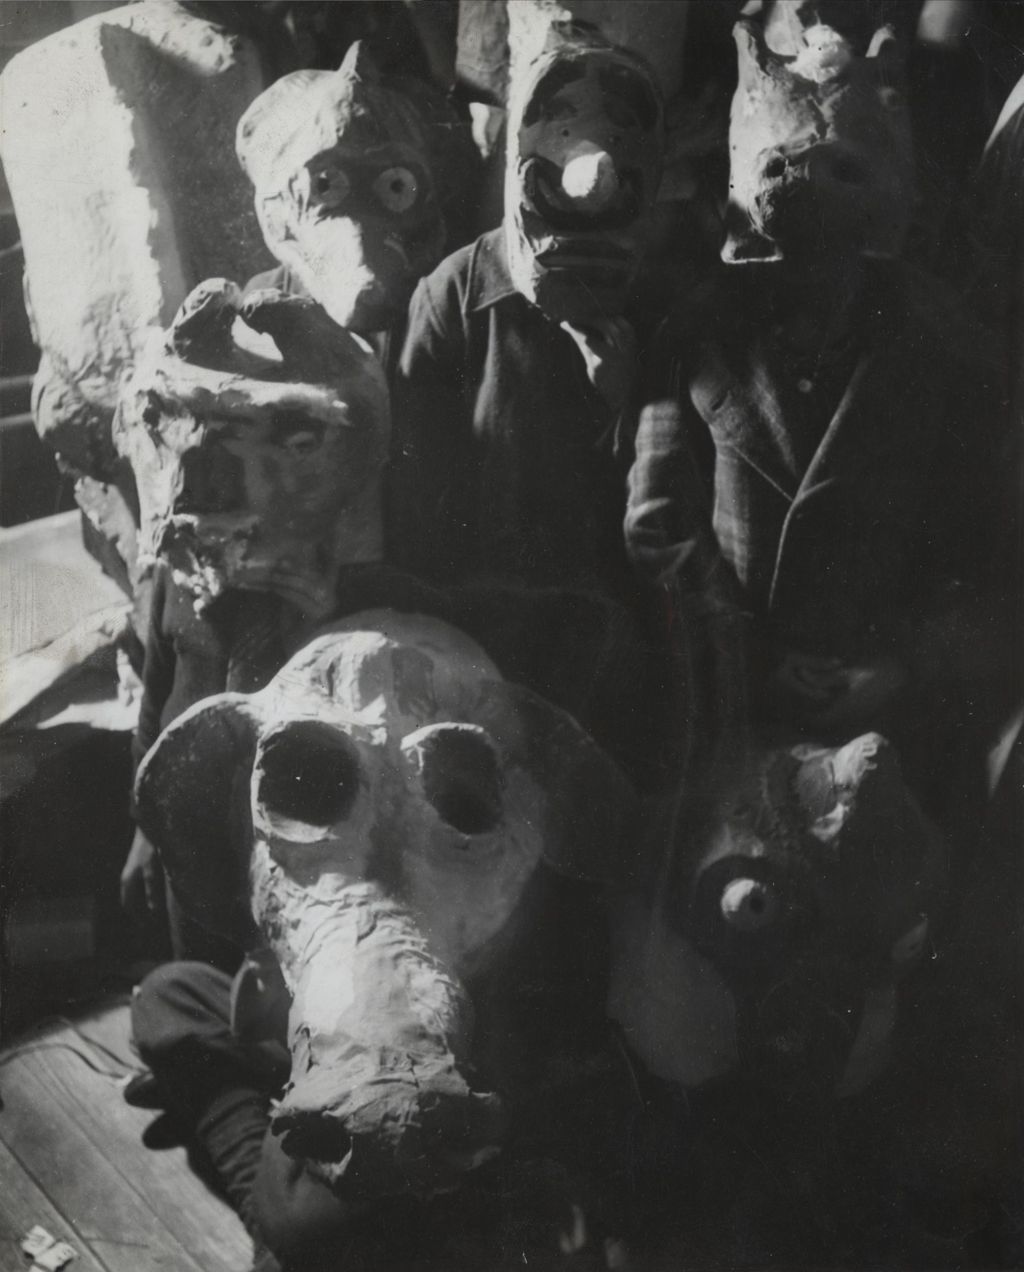 Children wearing papier-mache animal masks created for Hull-House 50th Anniversary circus